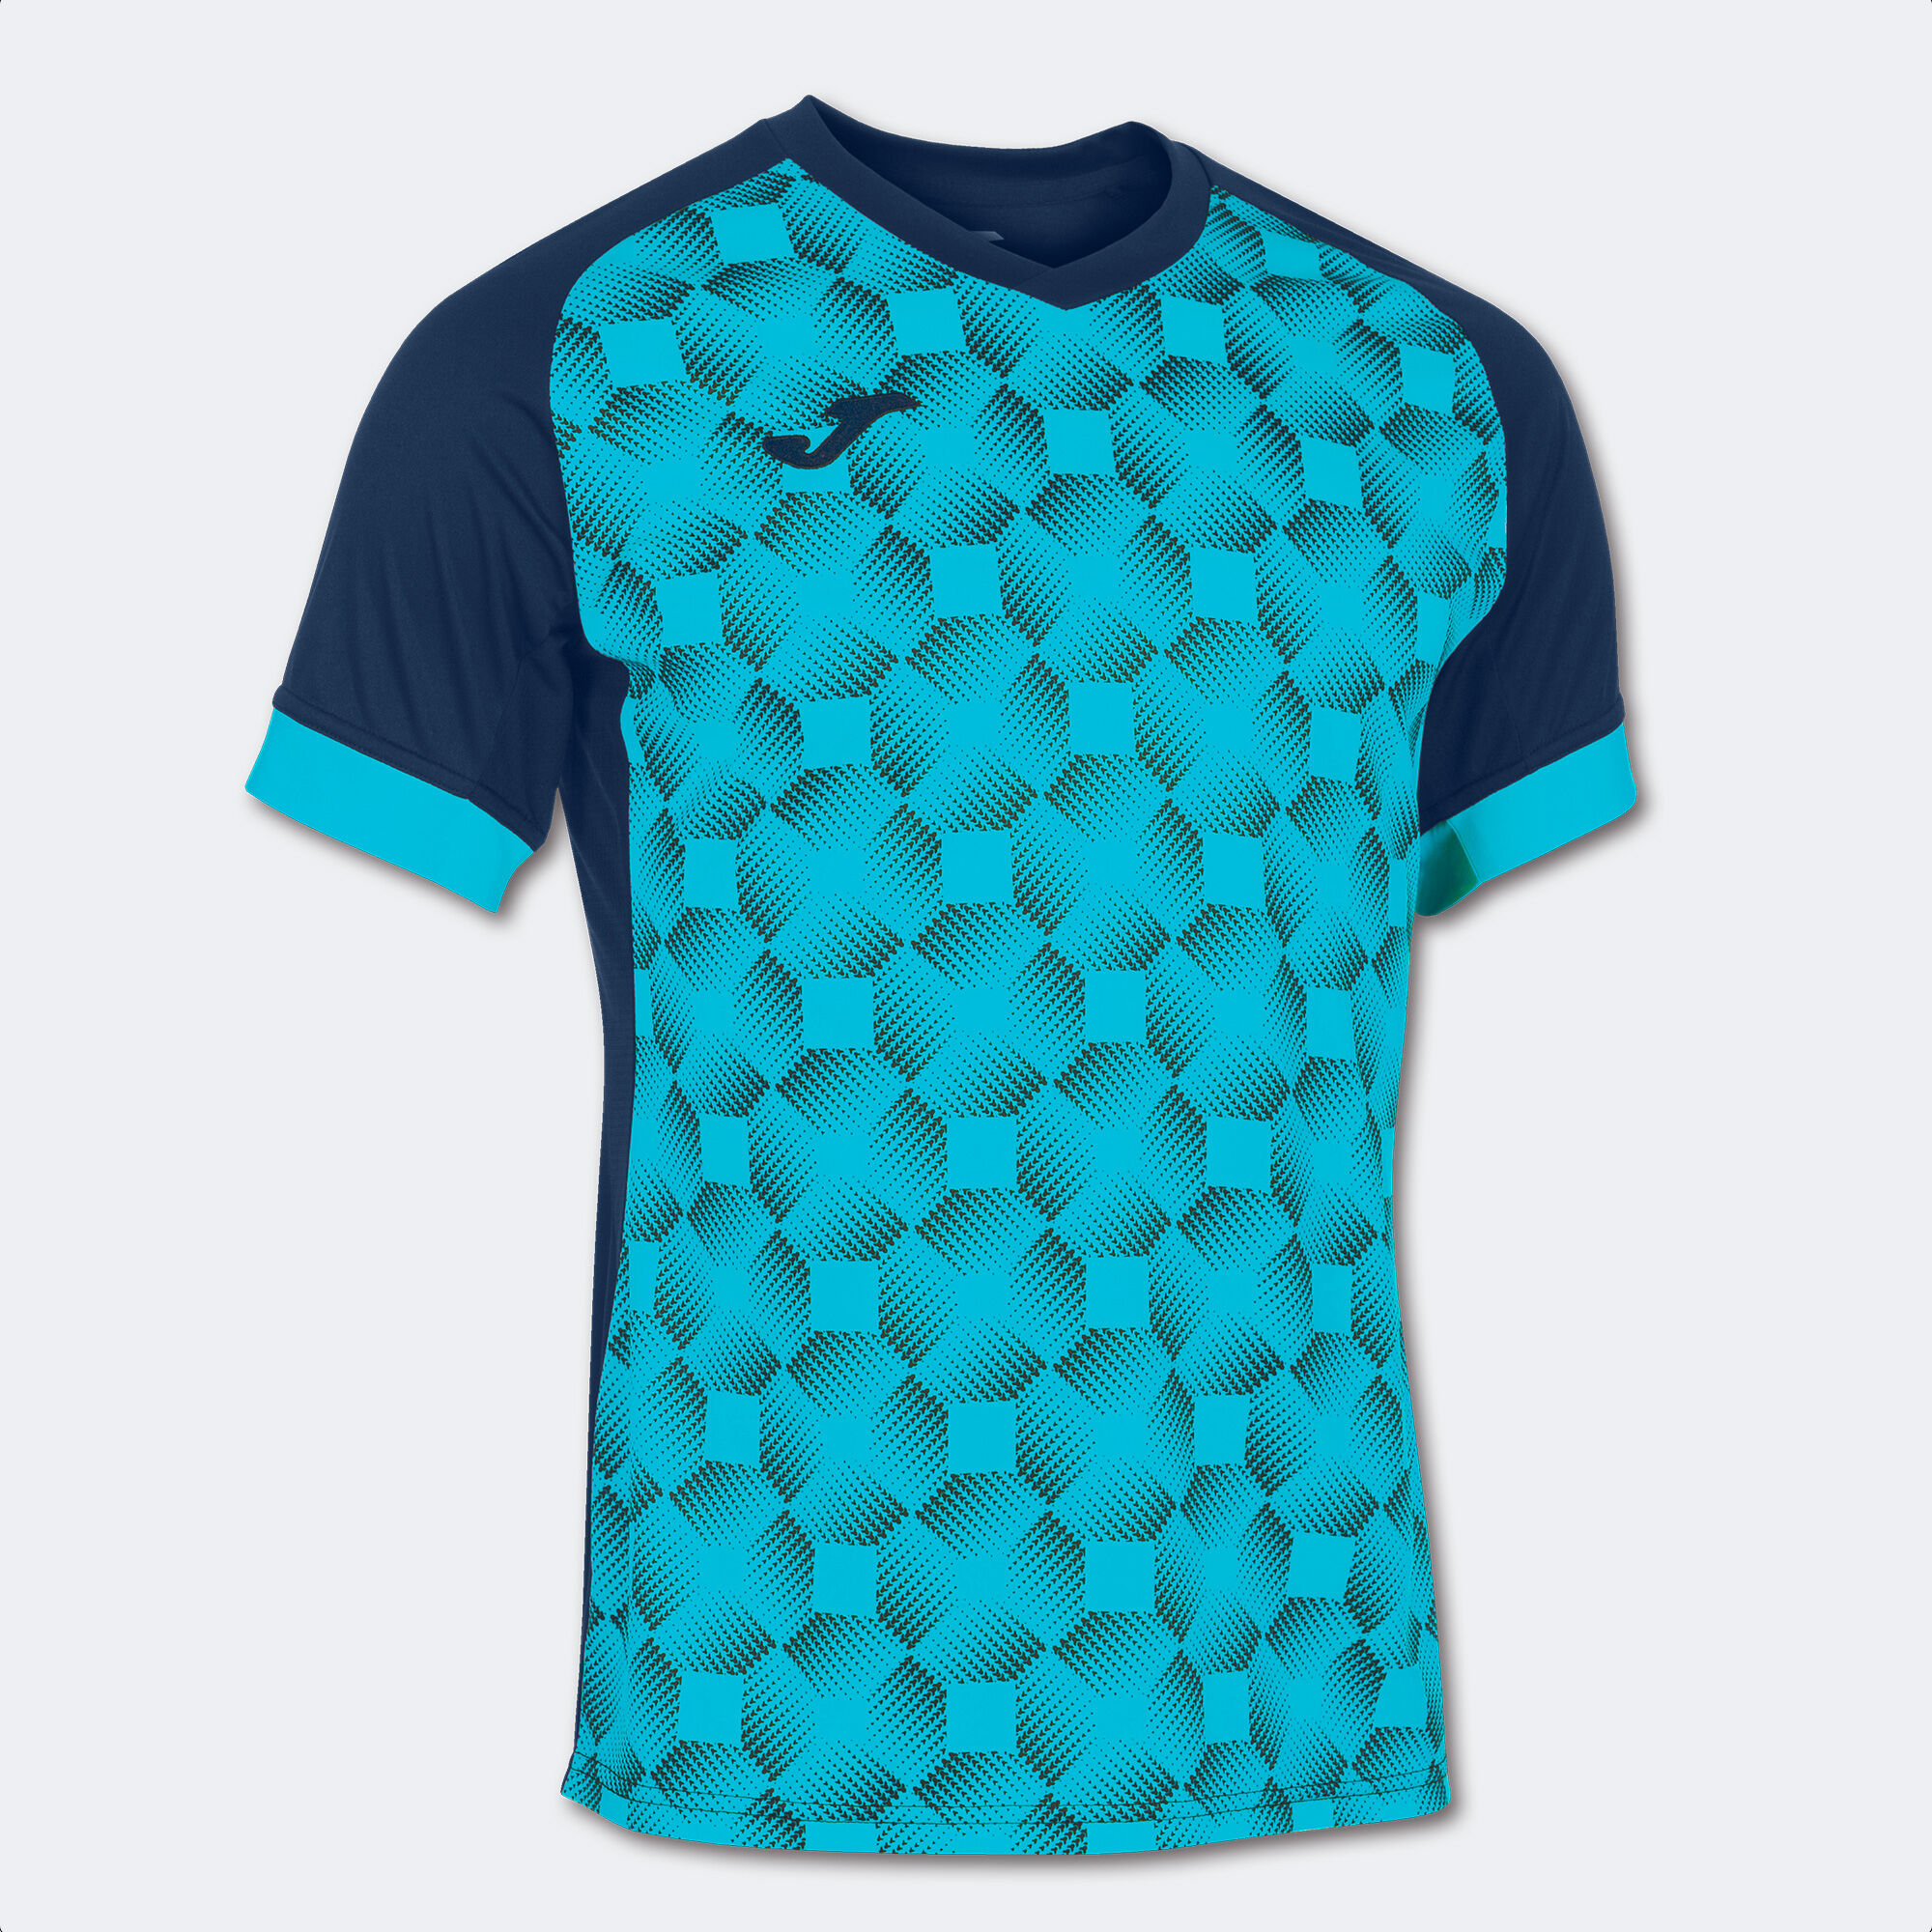 MAILLOT MANCHES COURTES HOMME SUPERNOVA III BLEU MARINE TURQUOISE FLUO